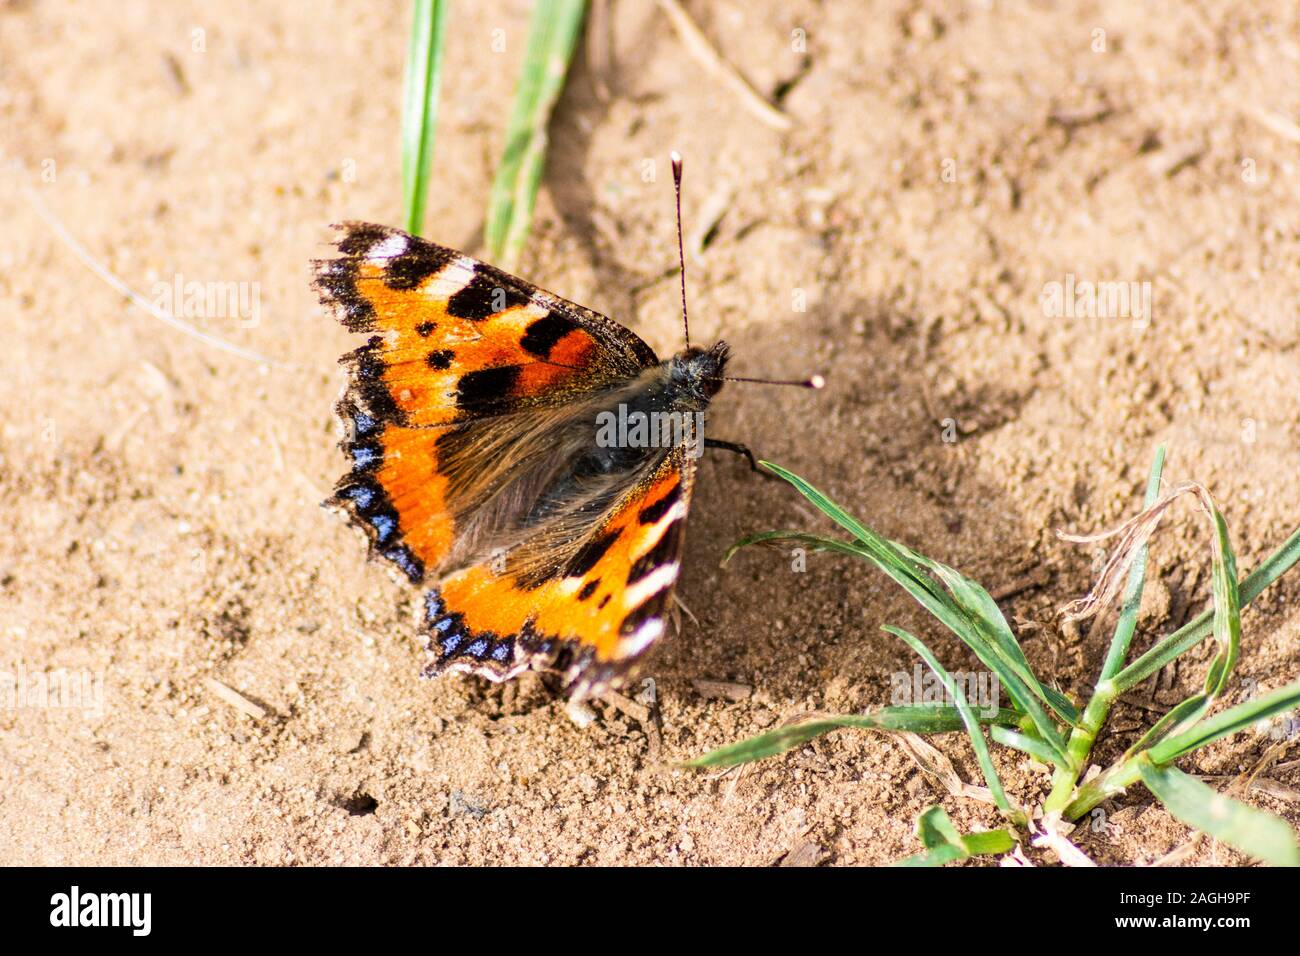 A small tortoiseshell butterfly Aglais urticae resting on some dry dusty ground with open wings and the odd leaf of grass visible Stock Photo